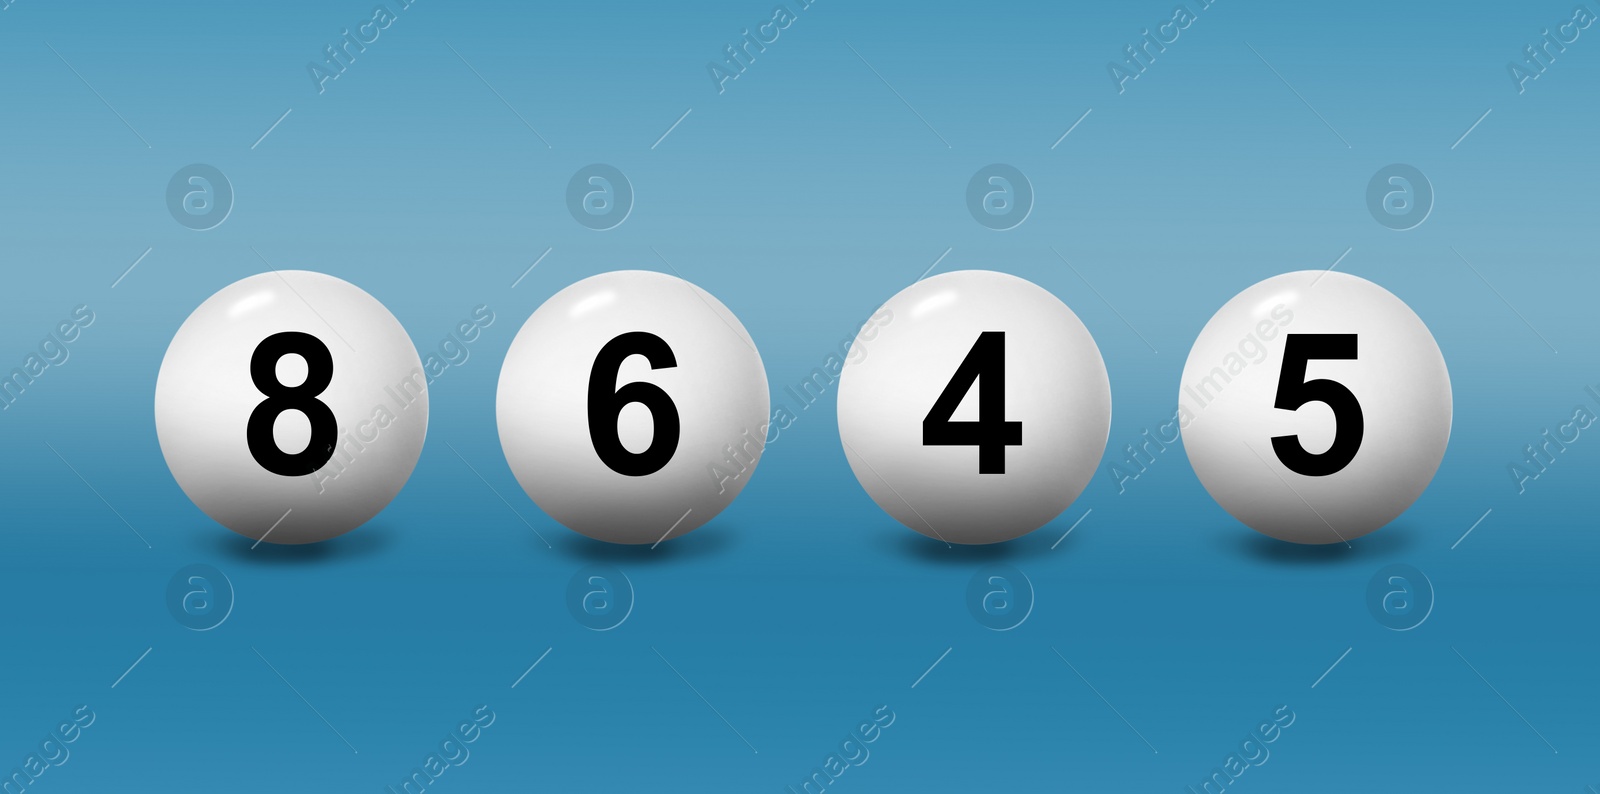 Illustration of Set of lottery balls with numbers on blue gradient background